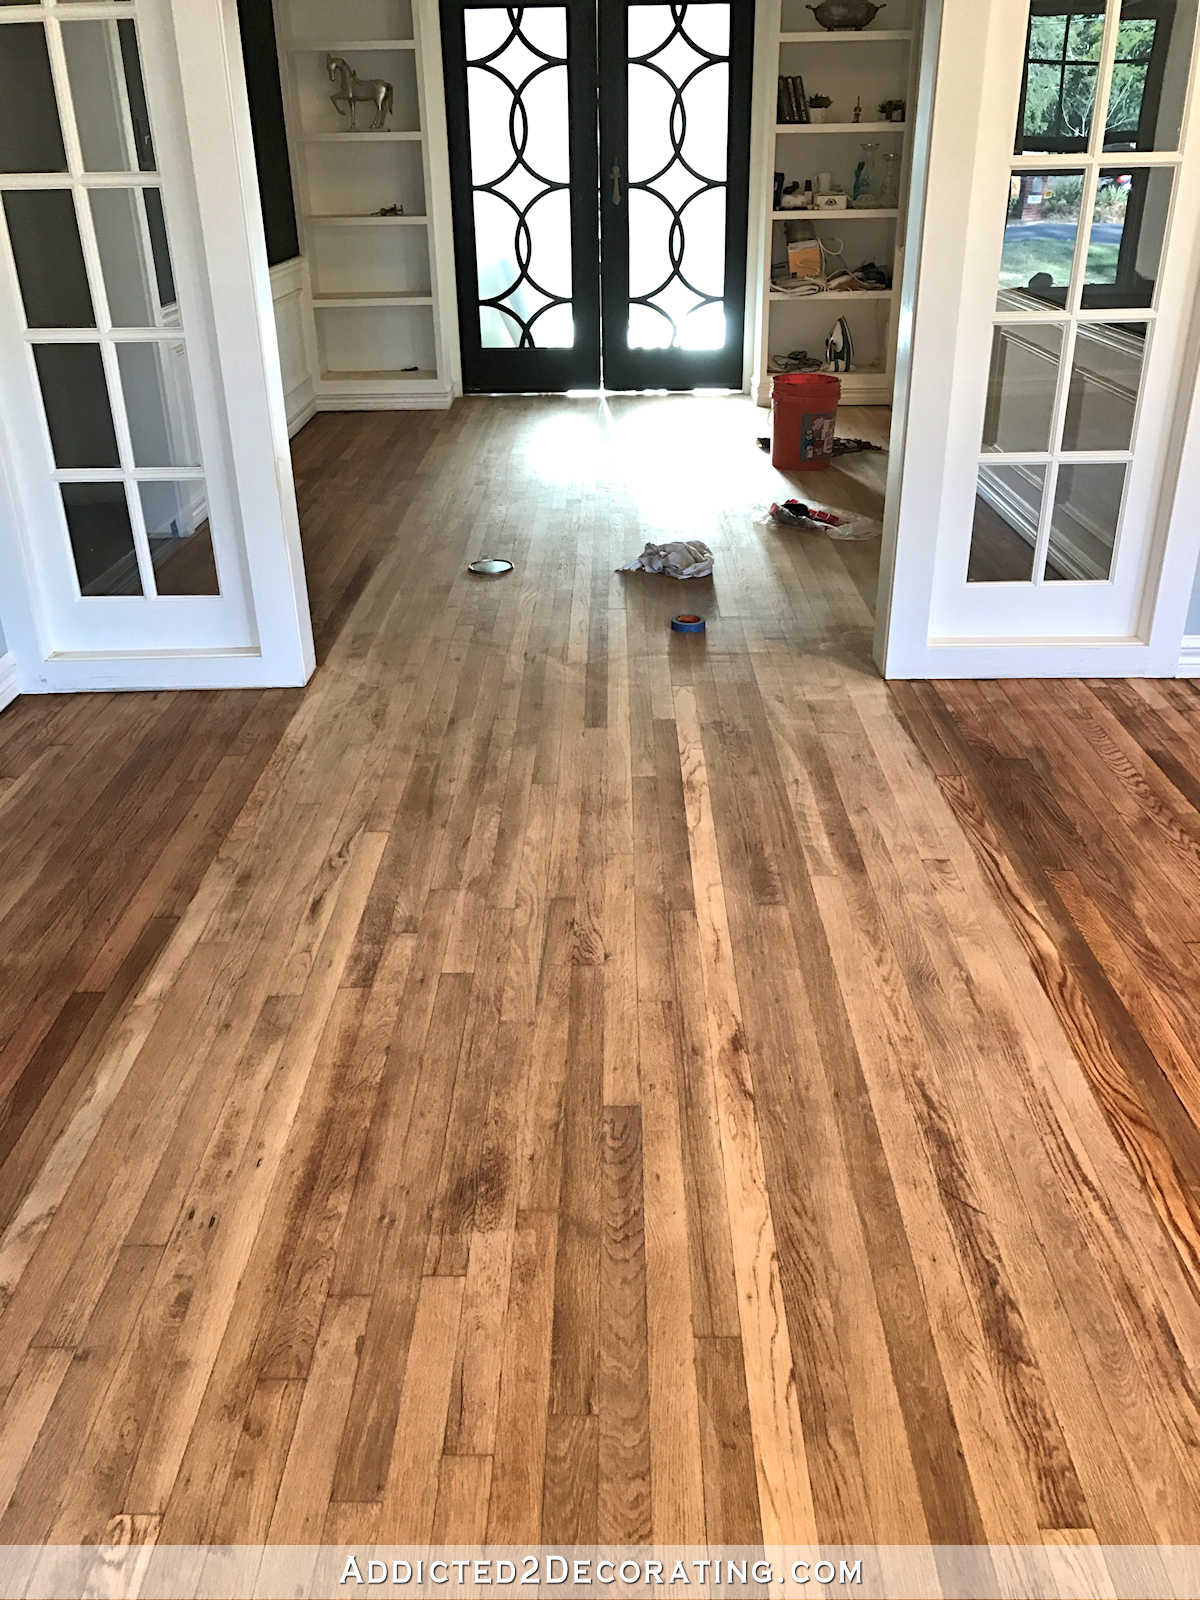 hardwood floor refinishing monmouth county nj of wood floor restoration diy beautiful how to get dog urine stains with wood floor restoration diy new adventures in staining my red oak hardwood floors products process